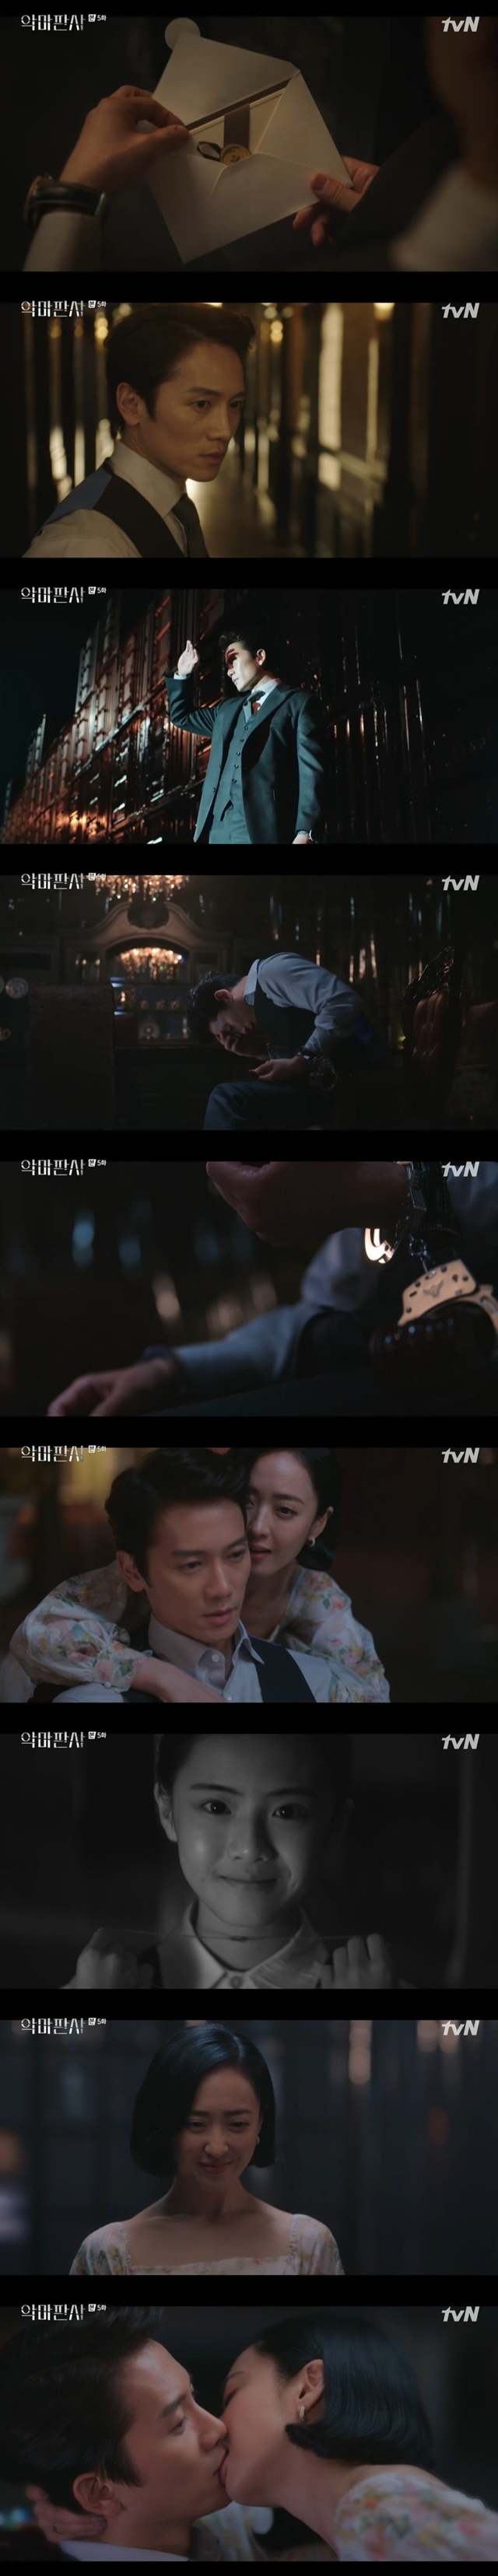 Kim Min-jung tied Ji Sung to the Chair and forced him to kiss, hinting at past history.In the 5th episode of TVNs Saturday Drama The Devil Judge (played by Moon Yoo-seok/directed by Choi Jung-gyu), which was broadcast on July 17, Jim Seona (played by Kim Min-jung) showed interest in Kang.Ga-on Kim (Ji Sung) shared his past history of death by half-brother Kang, but said, It is a crime to use trial as a tool, and John said, I do not remember asking you to understand.I dont need to understand, I want to be in front of you, I want to be in front of you, I want to be in front of you, I want to be in front of you, I want to be in the right direction.When Ga-on Kim said he would leave the court, he said, Come back to the court, its fun, its with you.Ga-on Kim began to gain popularity like idols for saving and injuring John in the bombing.At that time, Cha Kyung-hee (played by Jang Young-nam) secretly stole the wound of his son Lee Young-min (played by Moon Dong-hyuk) who received Tae-hyung and shed tears.Kang started to chase after knowing that there was someone behind Cha Kyung-hee who moved public opinion through broadcasting.Ga-on Kim went back to the former police officer who covered the cathedral fire with the police Yoon Soo-hyun (Park Kyu-young), and Yoon Su-hyun continued to suspect about the river, but Ga-on Kim asked, How much did you get from the foundation?When he ran away, Yoon Soo-hyun began to doubt the foundation.With him, the past history of Yoon becoming a police officer for his friend Ga-on Kim, who has been in constant trouble, was revealed.Lets go out, but Yoon Soo-hyun responded, Its too late to do that.The trial court took charge of the sexual assault case of Actor Nam Seok-hoon, and the prosecution insisted on physical castration and drove Kang to the corner.Jin Seona deliberately brought Nam Seok-hoon into the case through Cha Kyung-hee and made a difficult problem for Kang John.If John does not give a castration, the people will be disappointed, and even if he does, he will be in favor of the end.Ga-on Kim opposed castration, but Oh Jin-ju (played by Kim Jae-kyung) approved.When the public was satisfied with the ruling of the coercion, Jeong Seon said, Is this how I do my homework?Then he took a letter and went to the place, fainting after being hit in the back of his head; John was tied to Chair, and Jeong Seon appeared and was back-hugged.